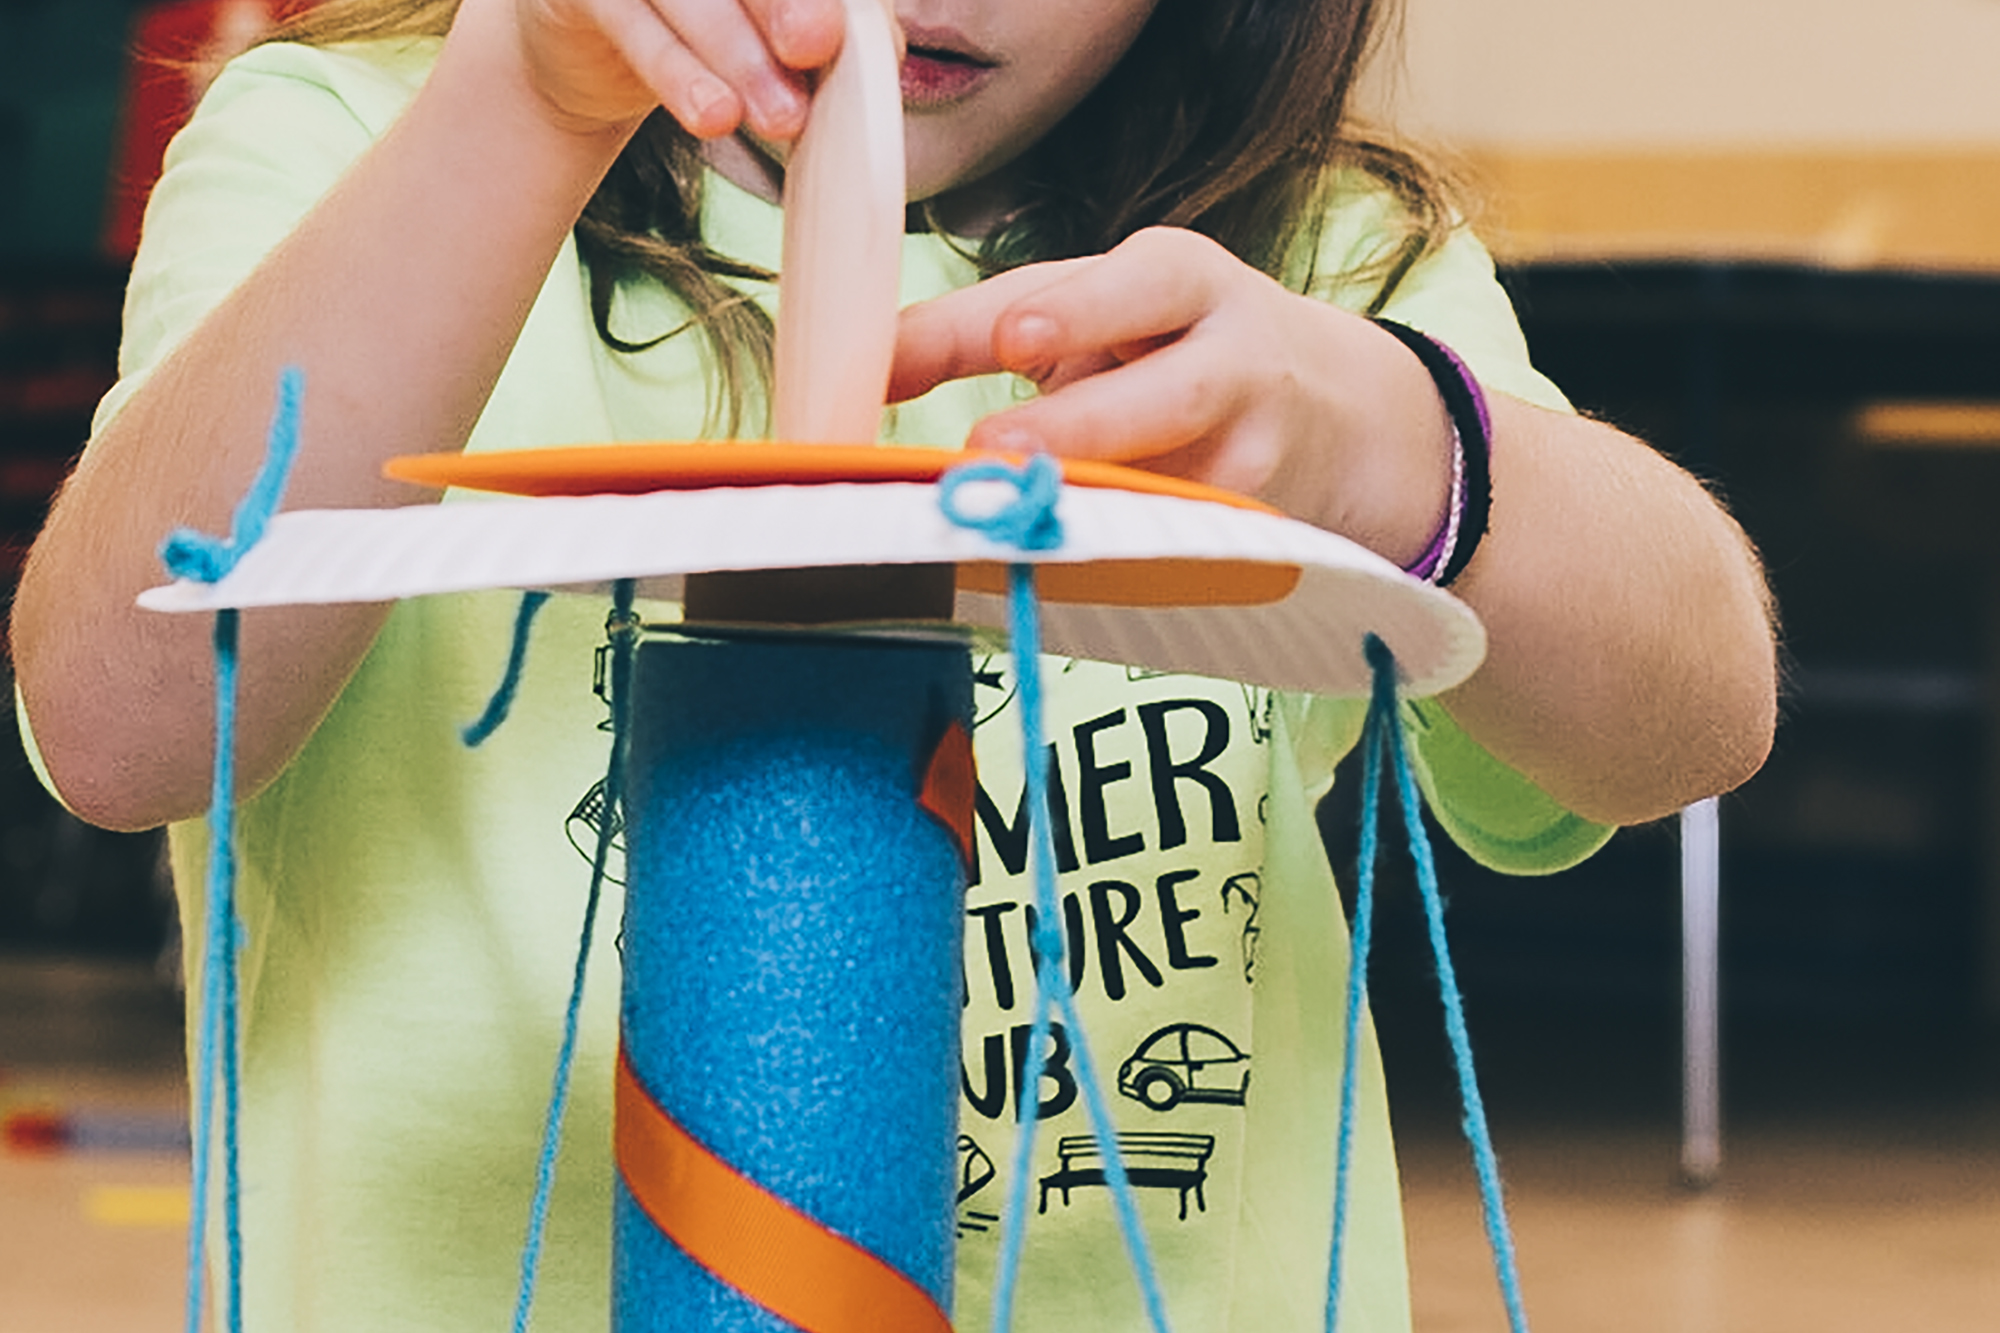 At the Primrose Schools Summer Adventure Club, children will embark on a “Ready, Set, Robotics!” challenge where they will design and engineer an original invention to support creative thinking and problem-solving.